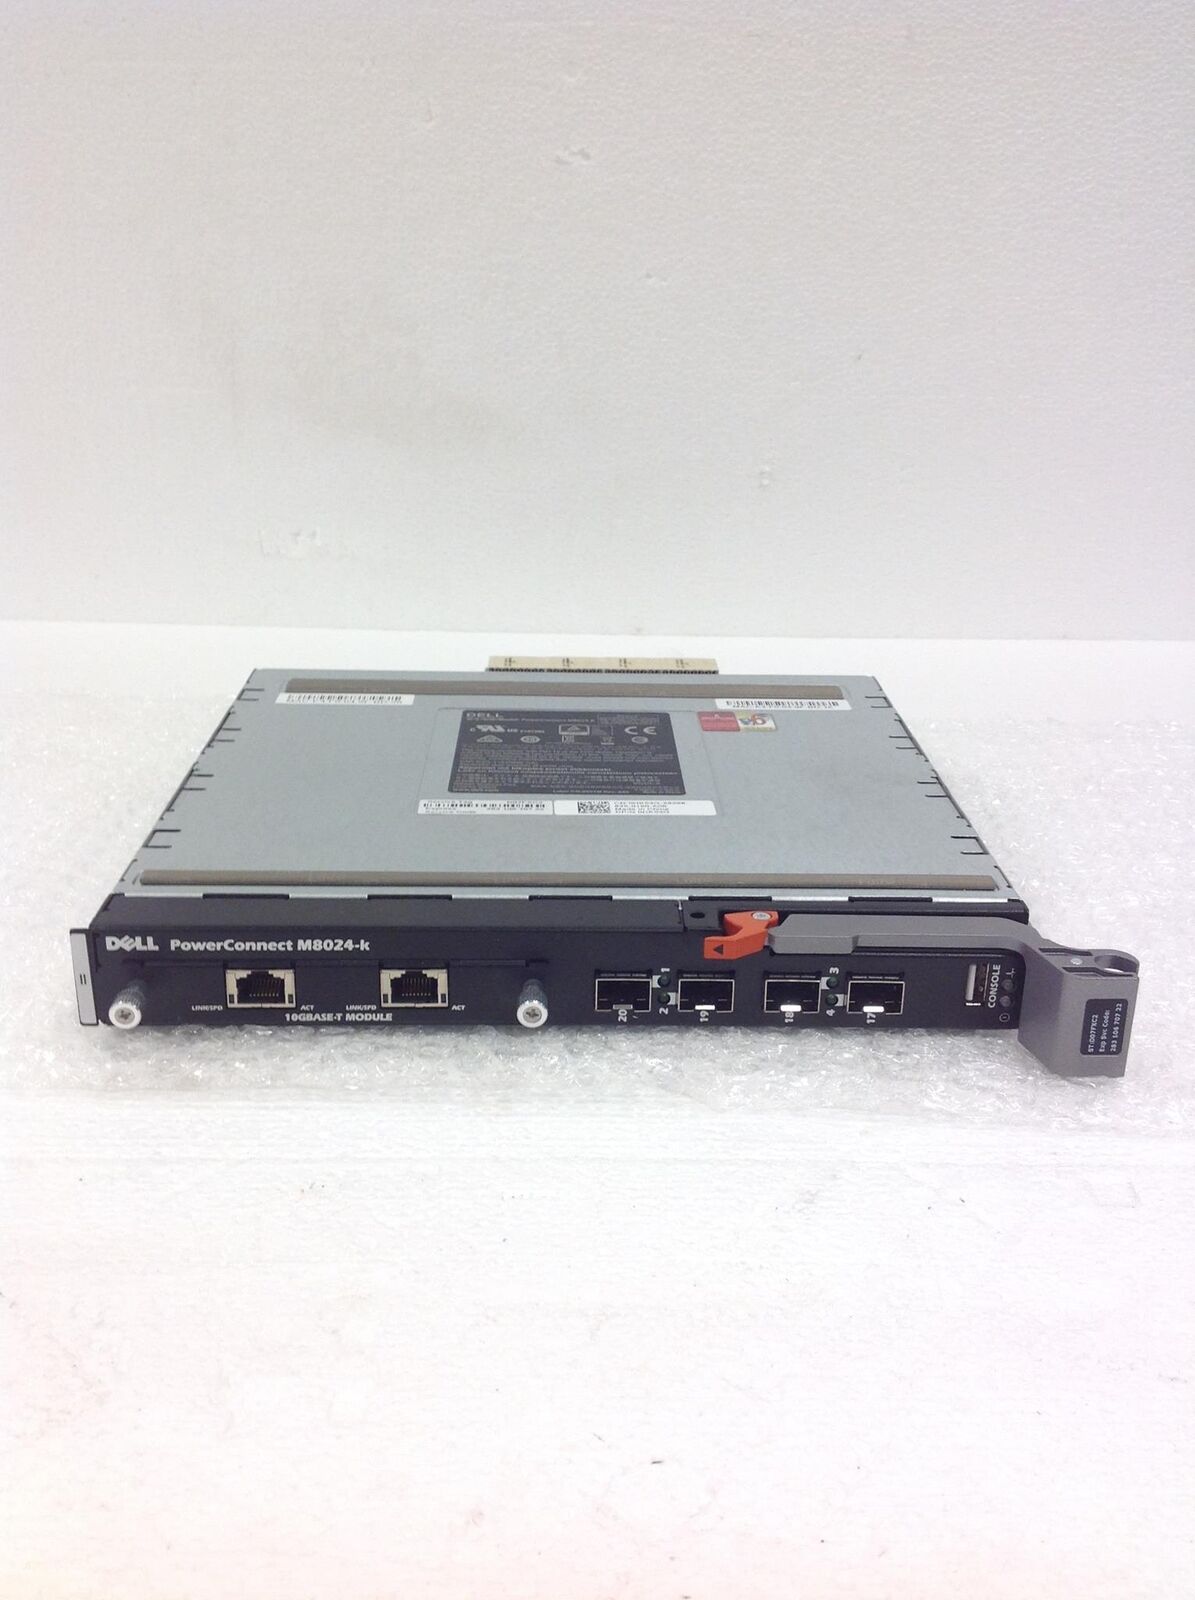 Dell PowerConnect M8024-K, 0HK53G, 10Gb Ethernet Blade Switch For M1000e Server